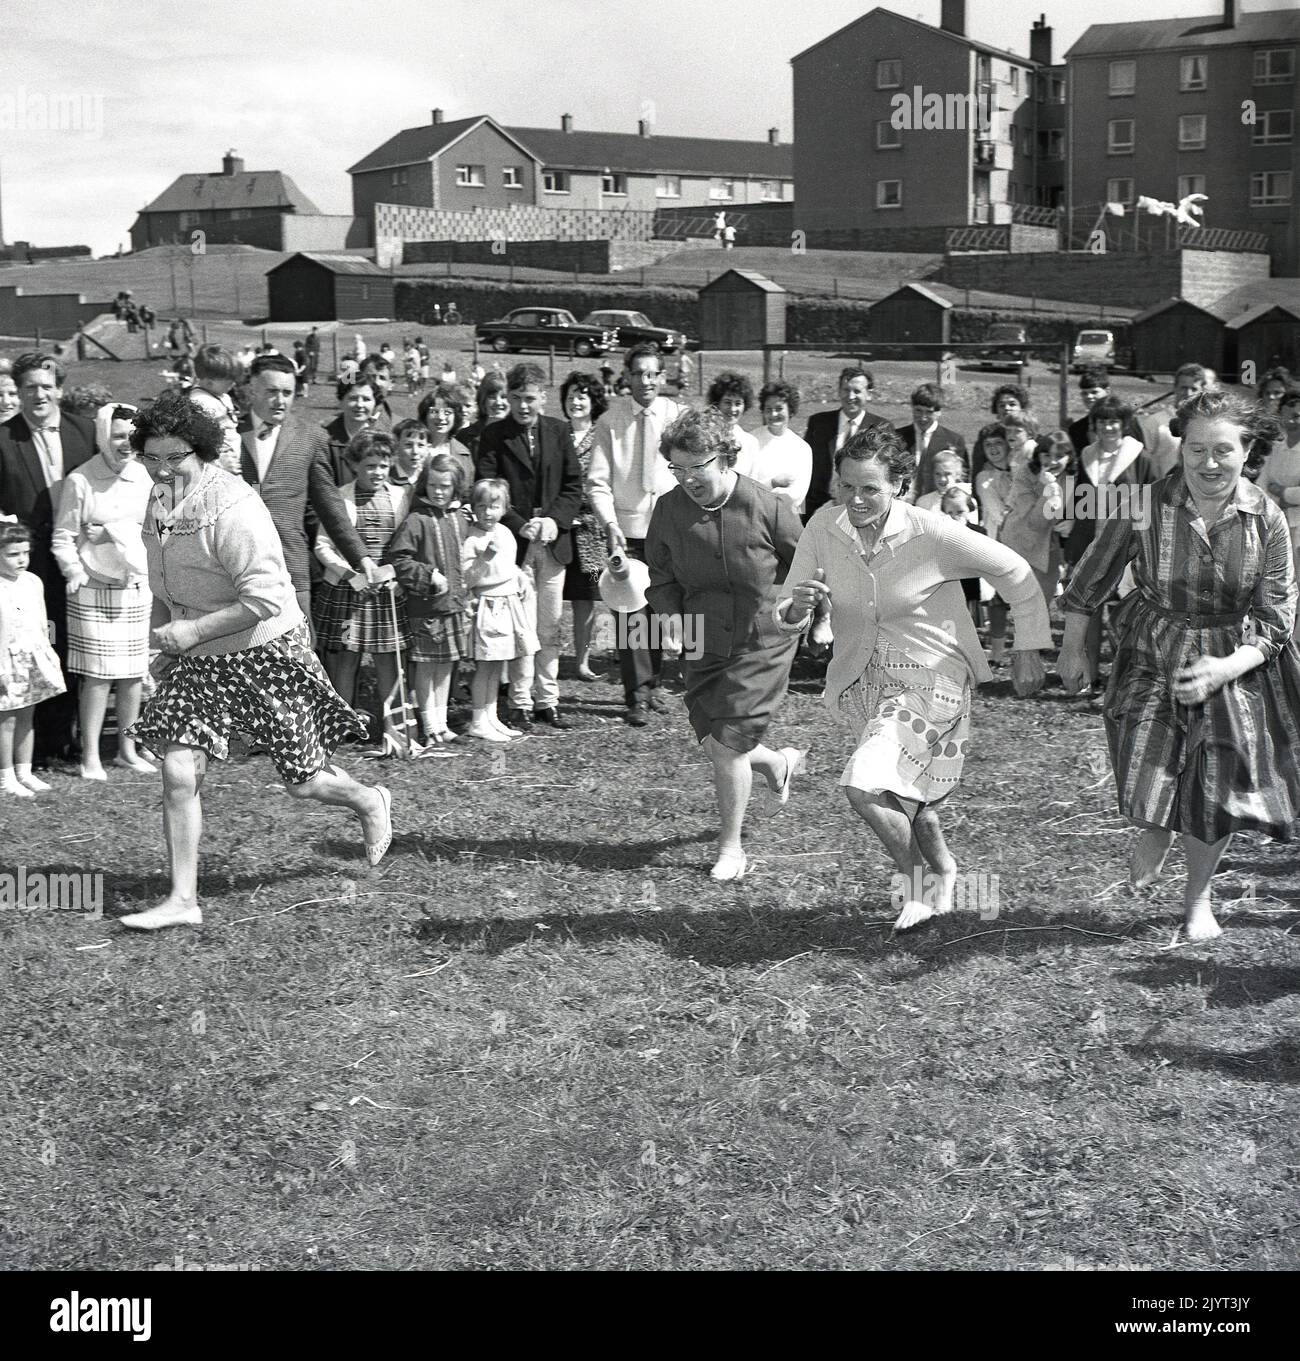 1965, historical, women taking part in a running competition, two in barefeet, on the grass in a field at a housing estate in North Queensferry, Edinburgh, Scotland, UK, as part of the North Queensferry gala day. Stock Photo